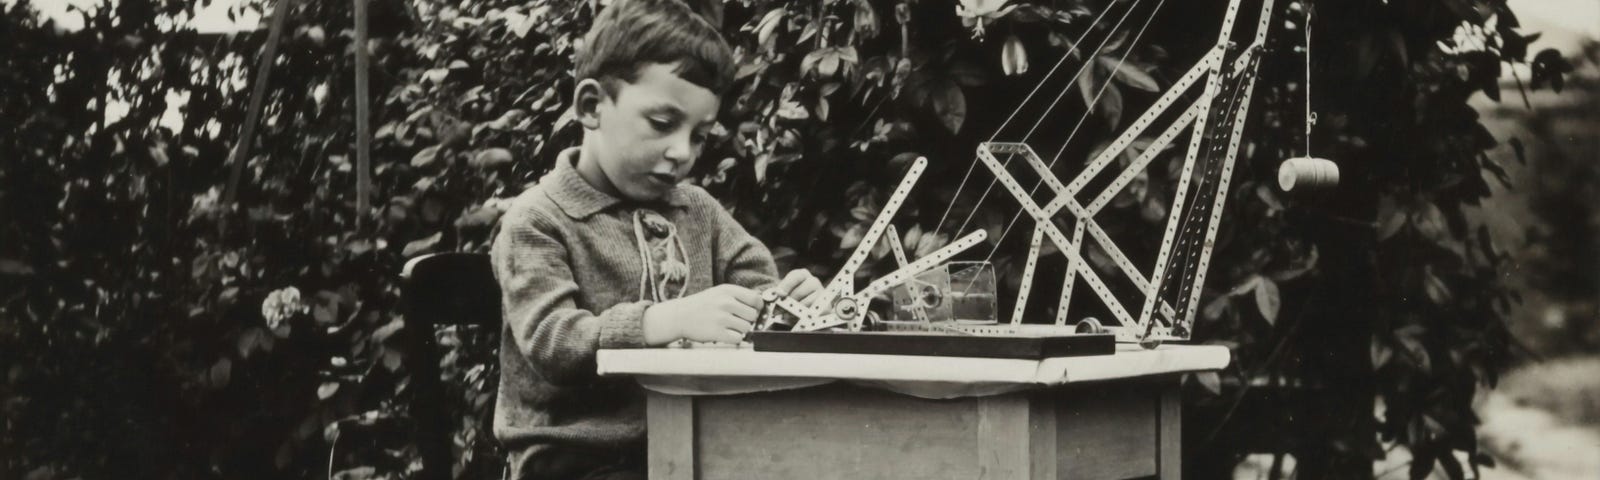 Young boy playing with Mecano set: black and white